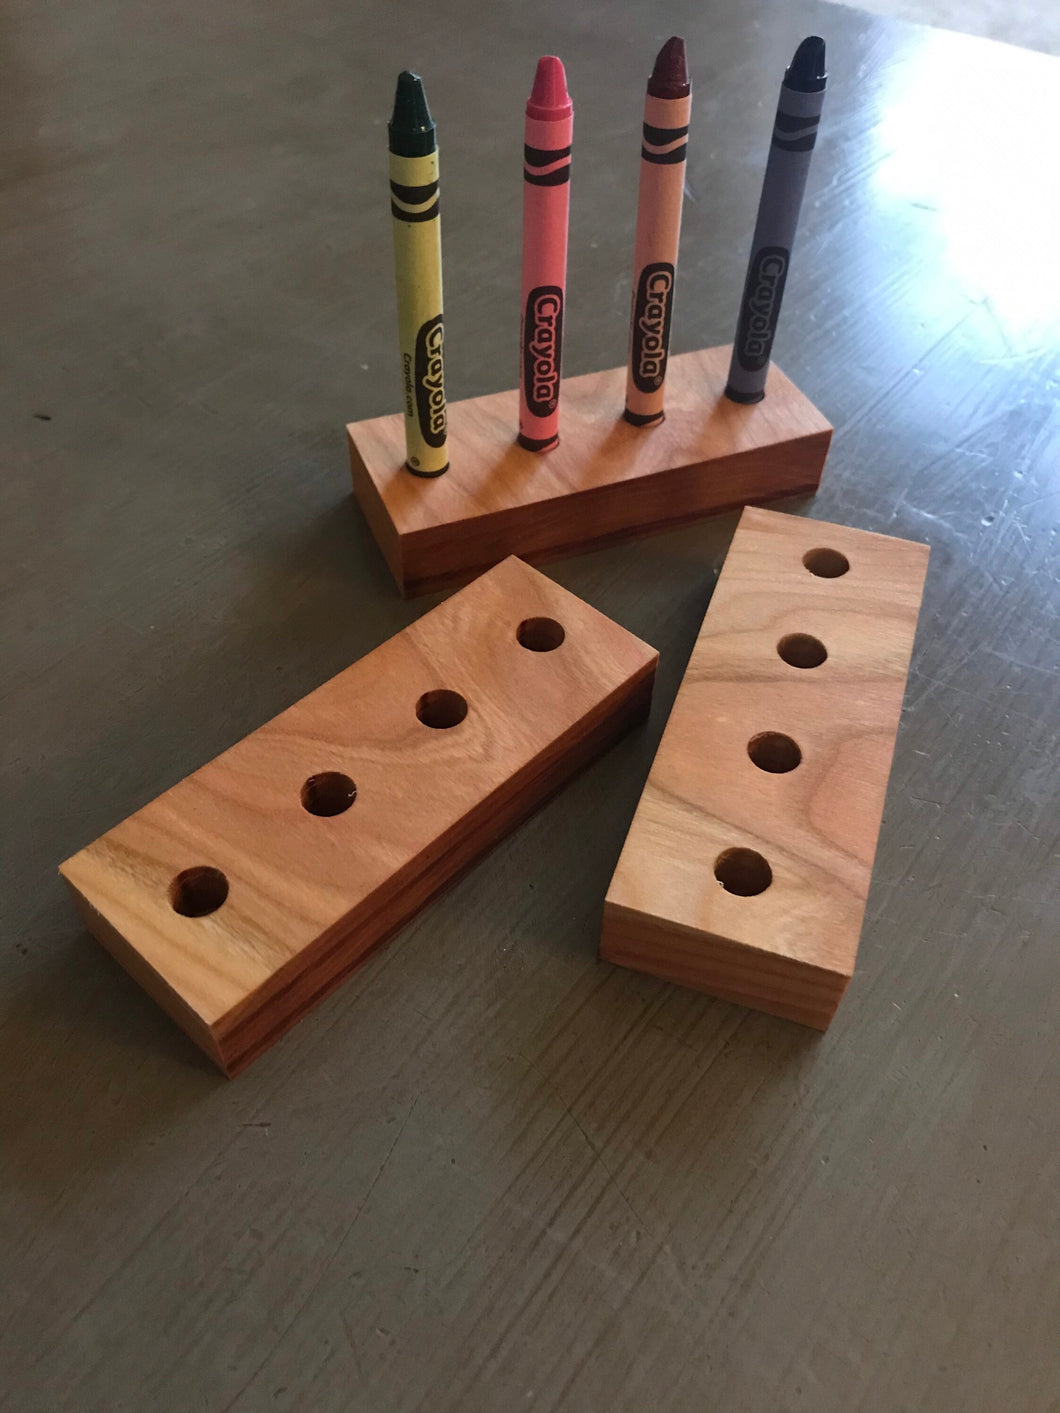 Crayon holder For Traditional Crayons - Crayola Size